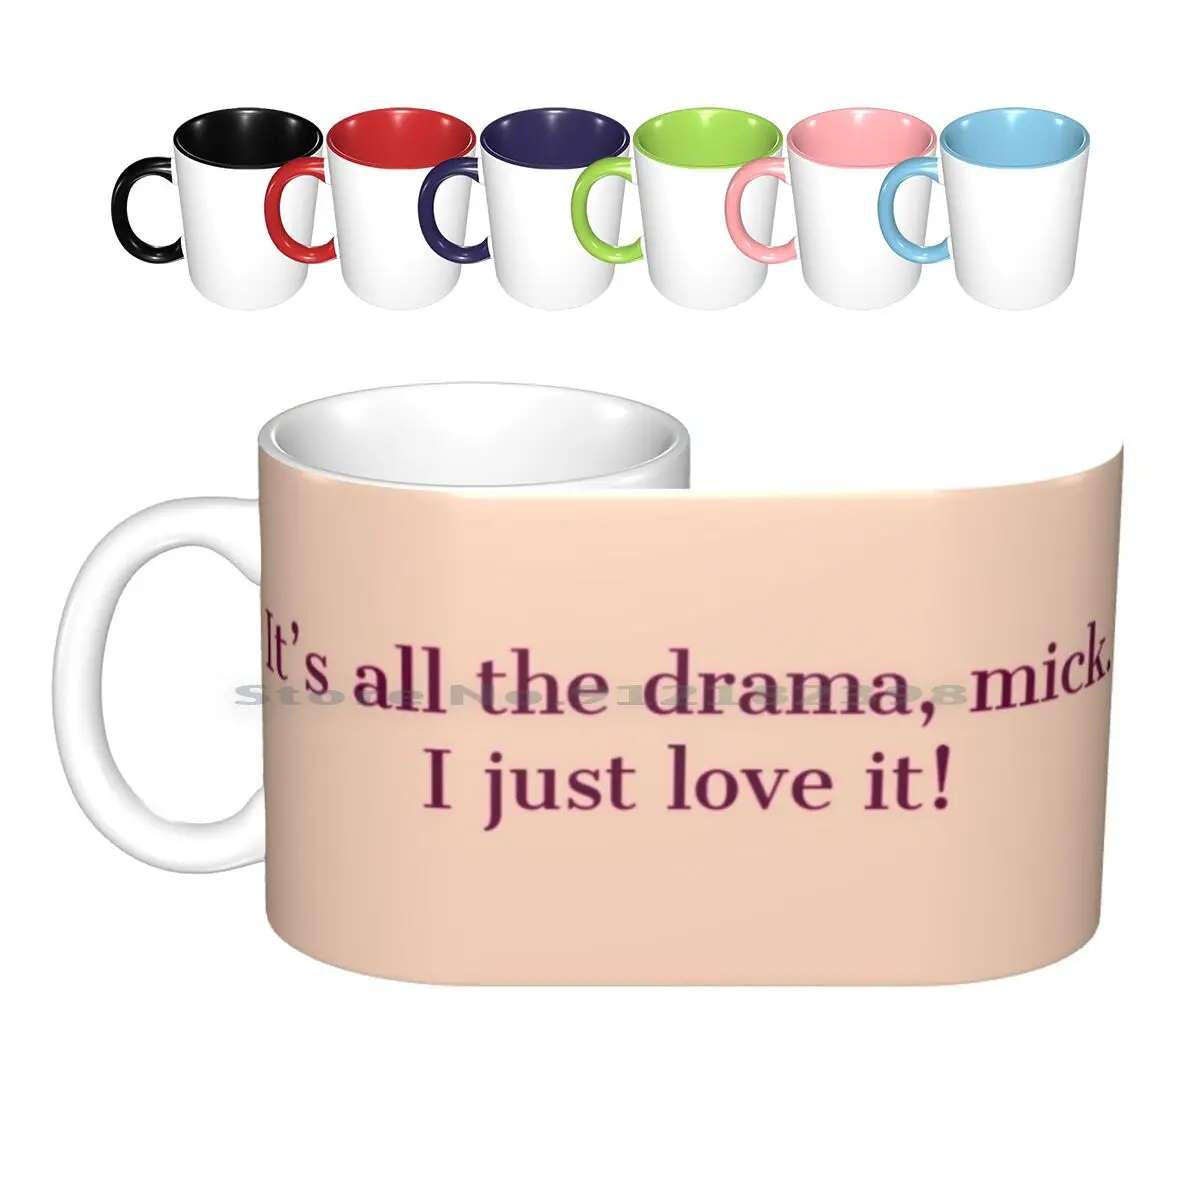 

It's All The Drama Mick - Gavin And Stacey Quote Ceramic Mugs Coffee Cups Milk Tea Mug Funny Gavin And Stacey James Corden Funny